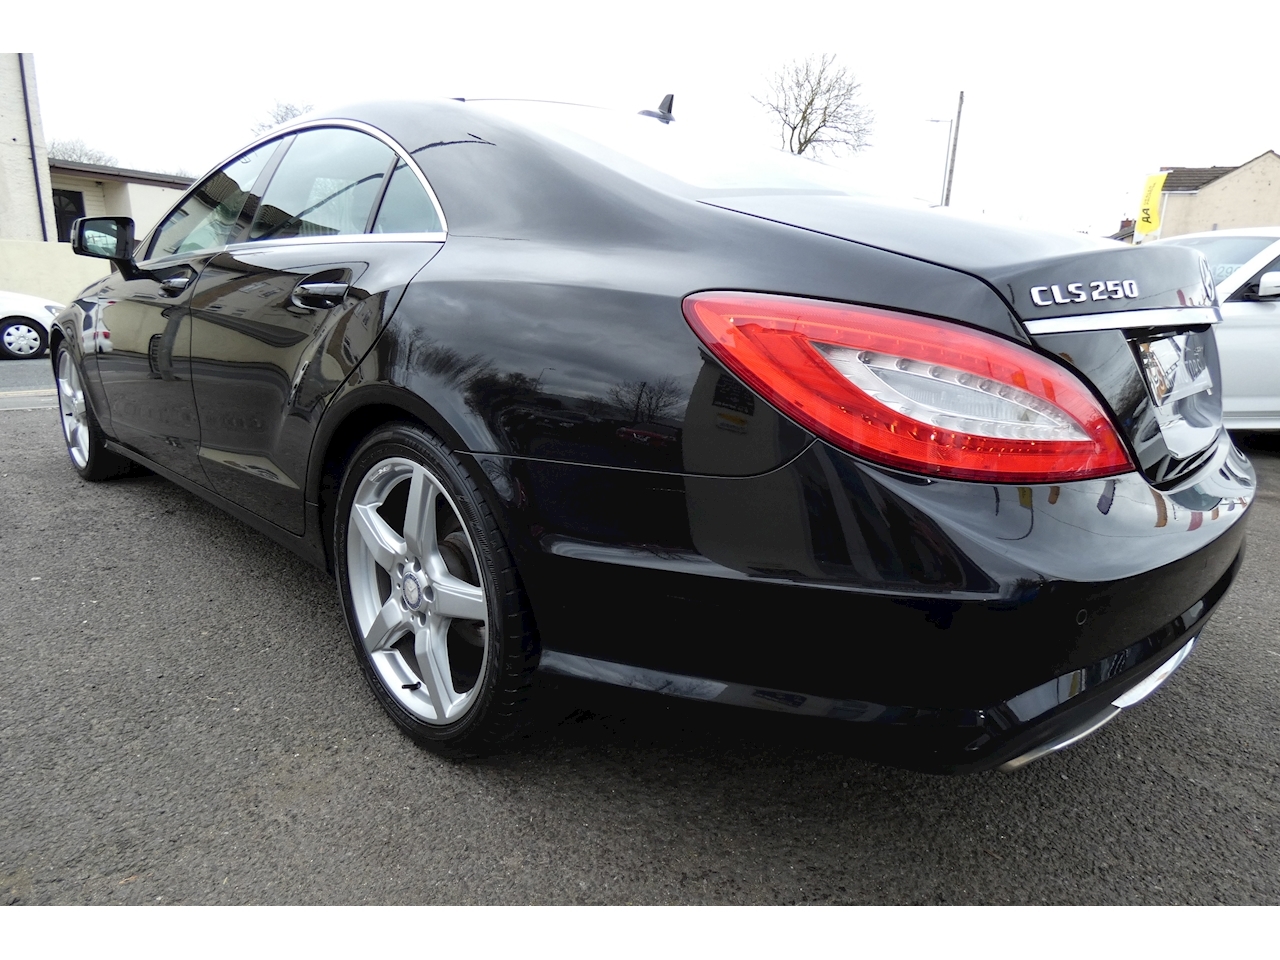 CLS Cls250 Cdi Blueefficiency Amg Sport 2.2 4dr Coupe Automatic Diesel